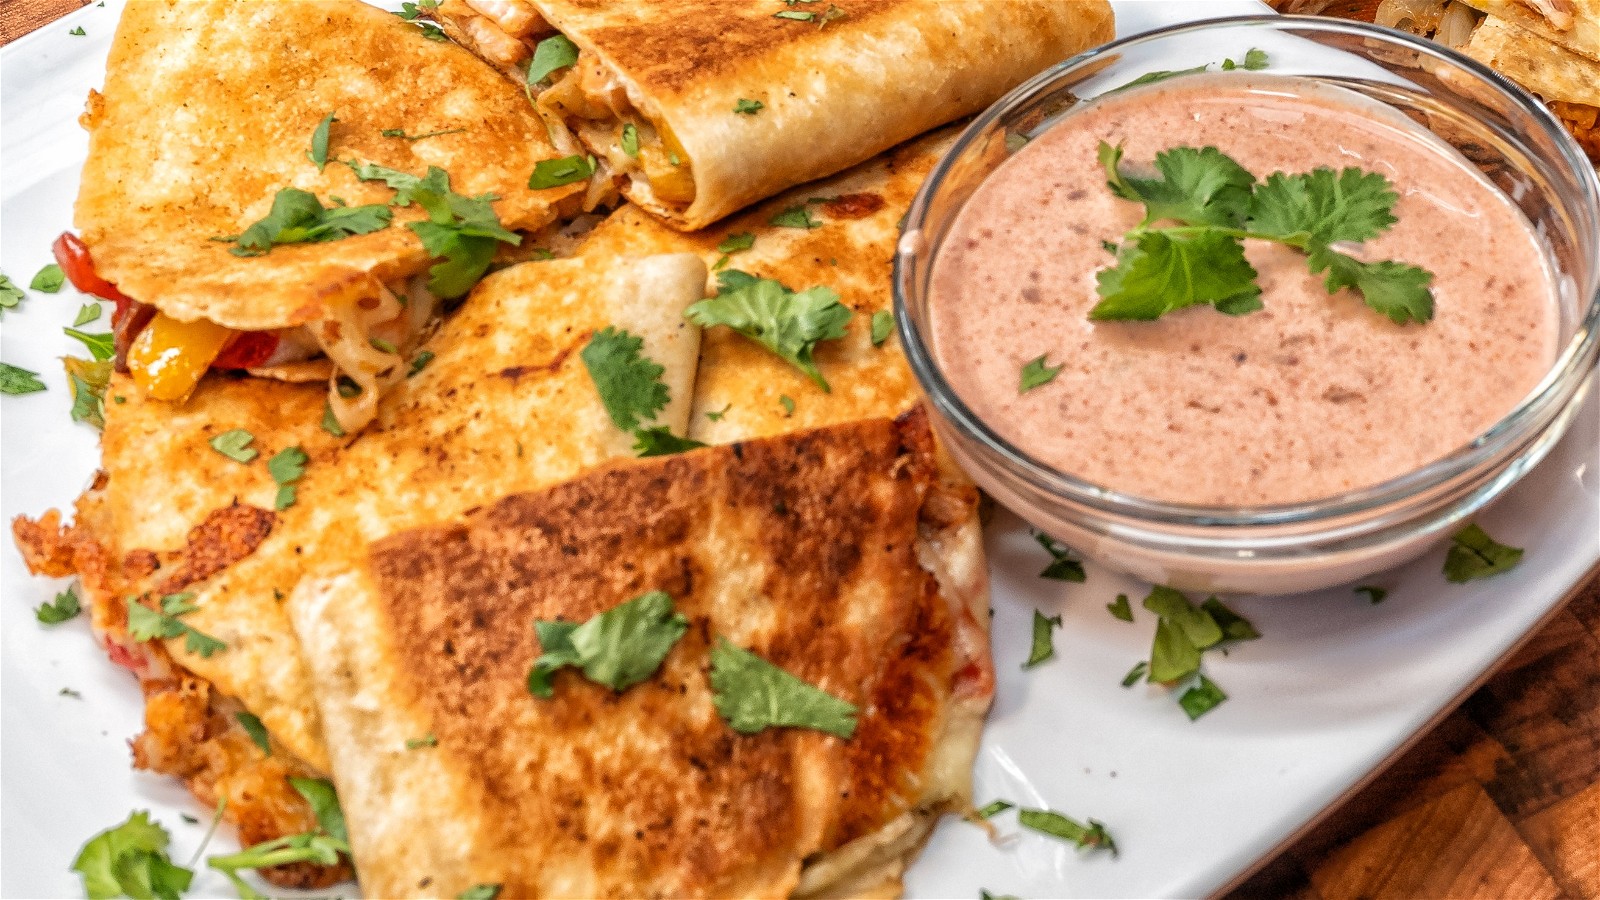 Image of Turkey and Cheese Quesadillas with Cranberry Chipotle Creama